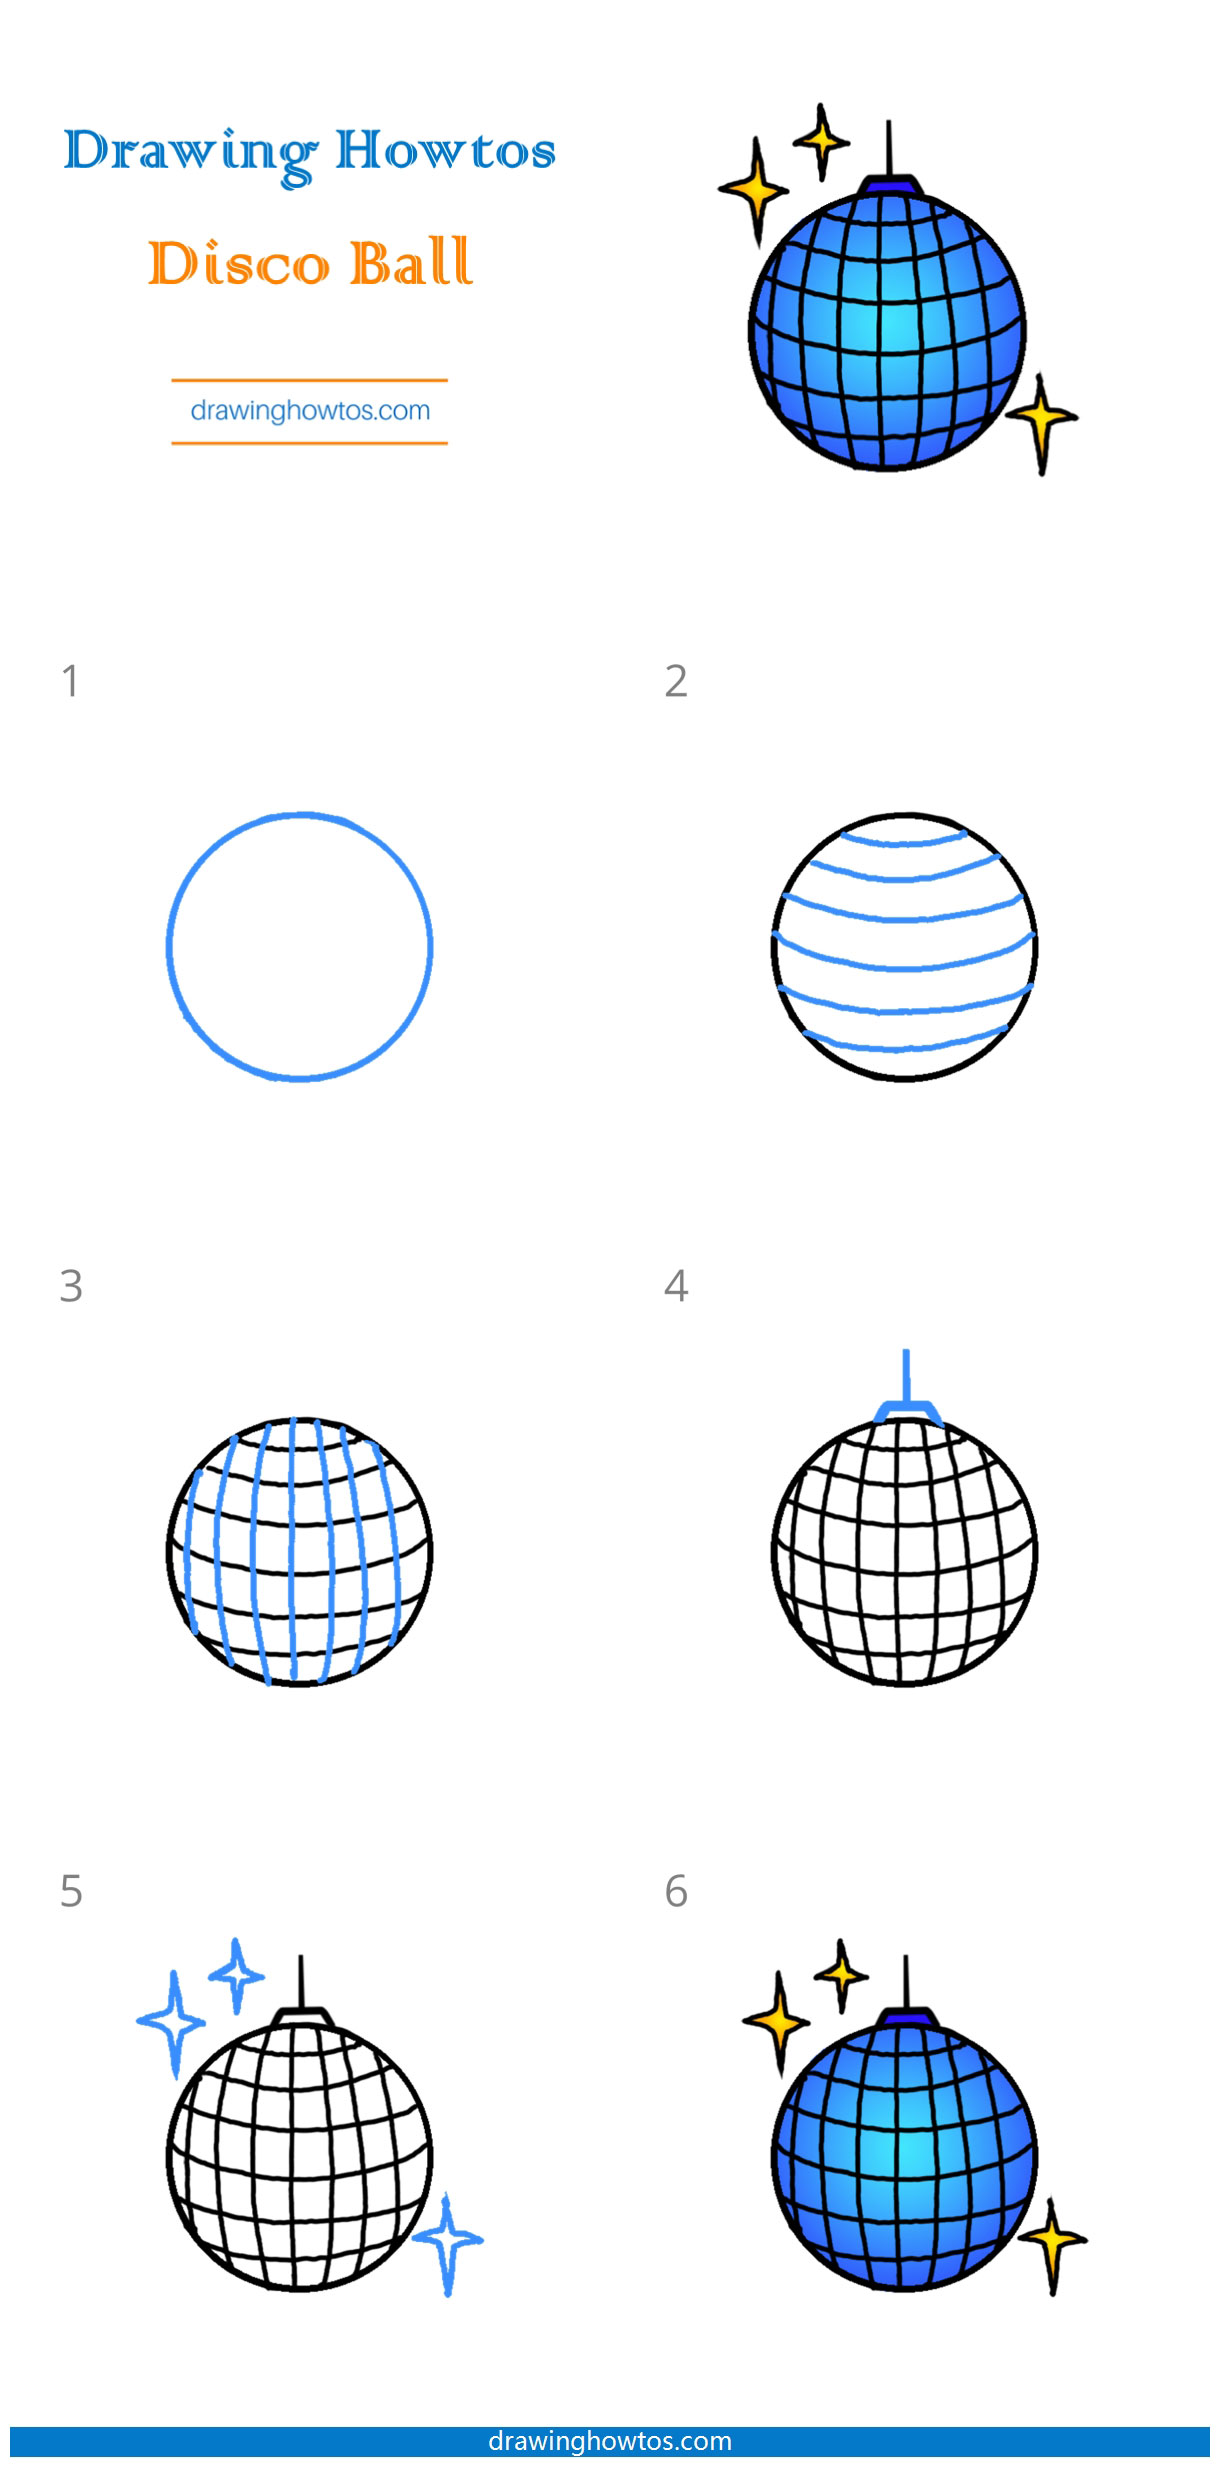 How to Draw a Disco Ball Step by Step